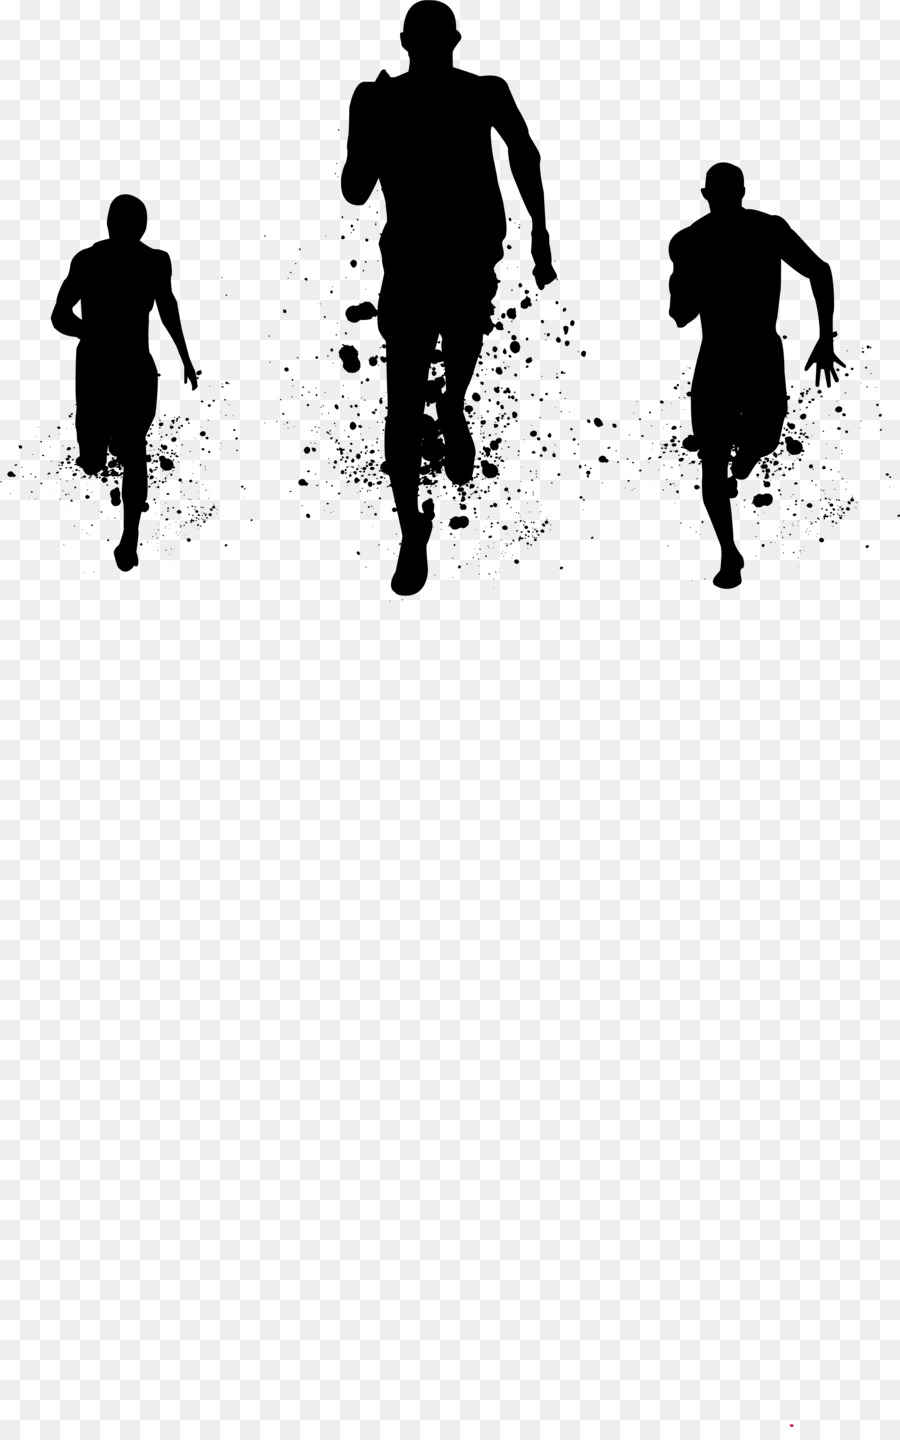 Freerunning Silhouette - People running png download - 3618*5736 - Free Transparent Morgan Creek Cross Country Race png Download.